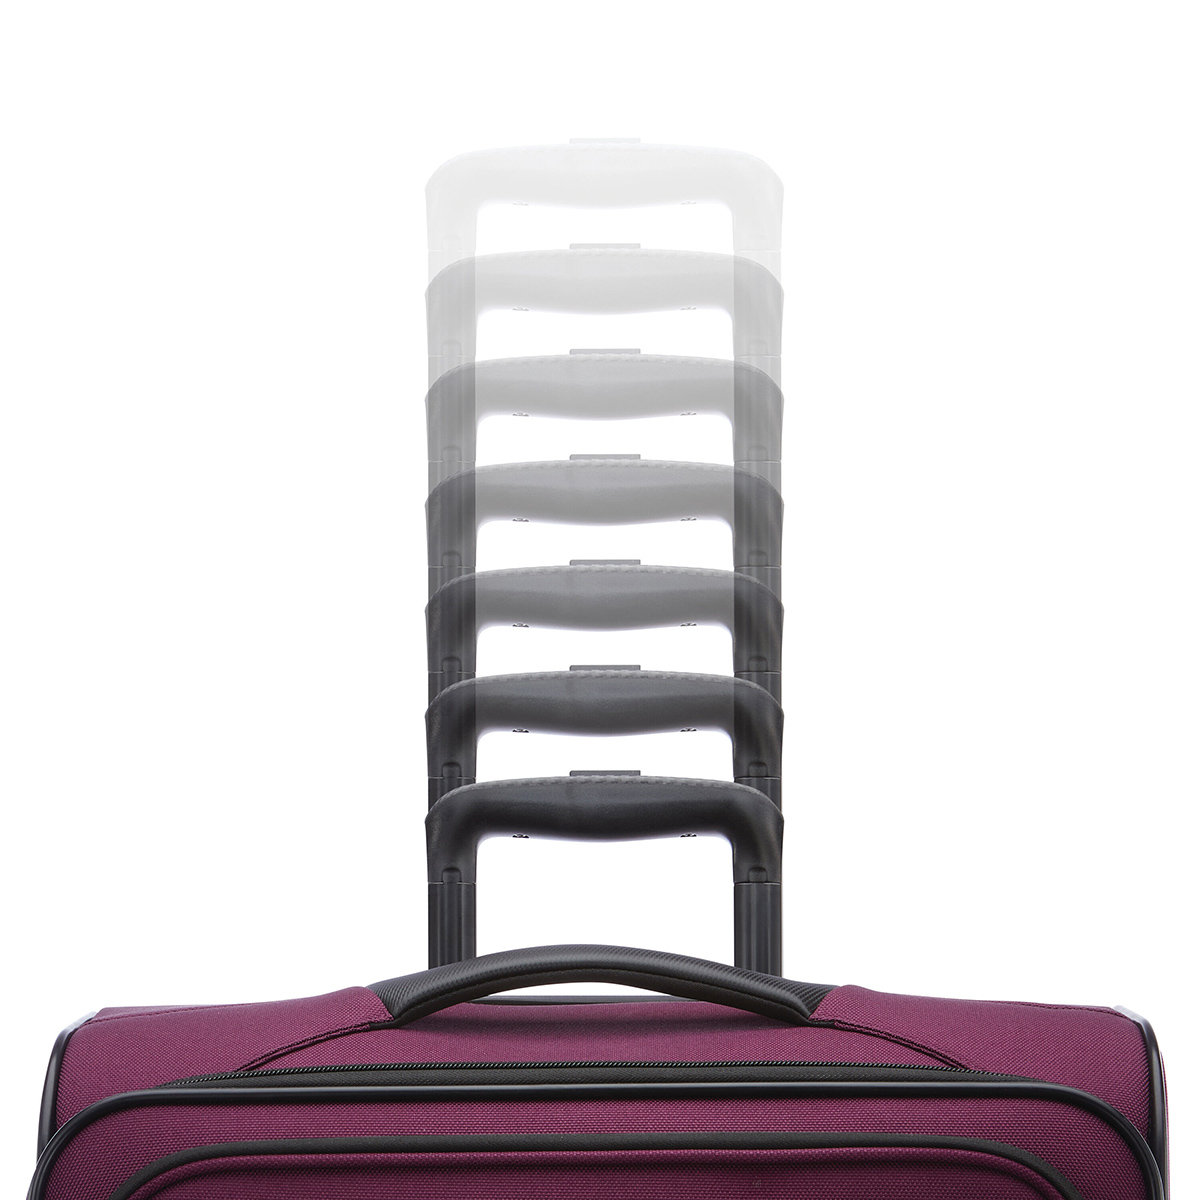 American Tourister(R) 4 Kix 2.0 24in. Spinner Luggage